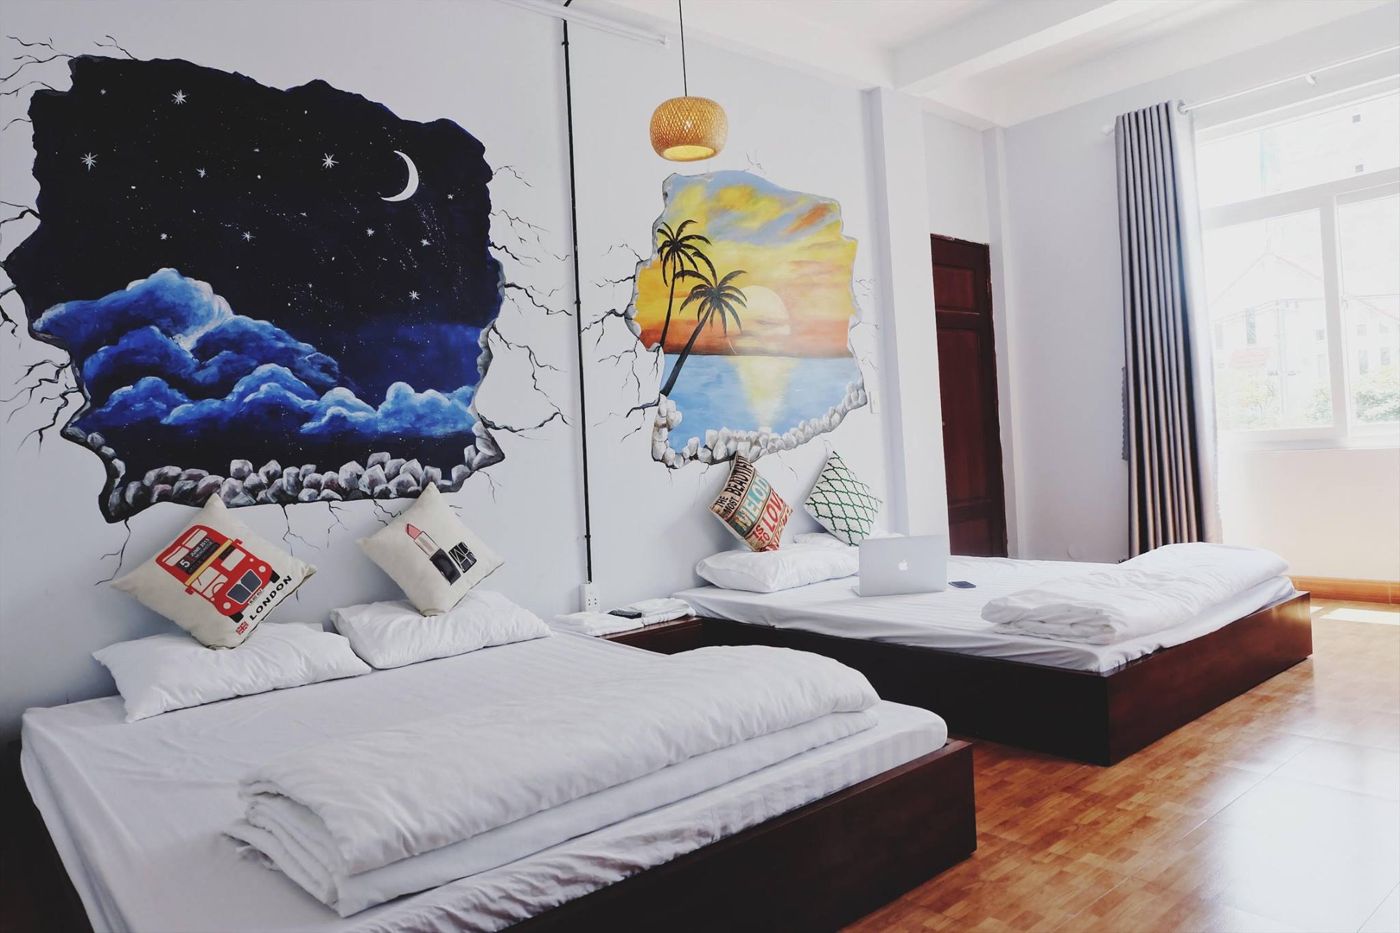 Budget hostels to spend the night in Da Nang